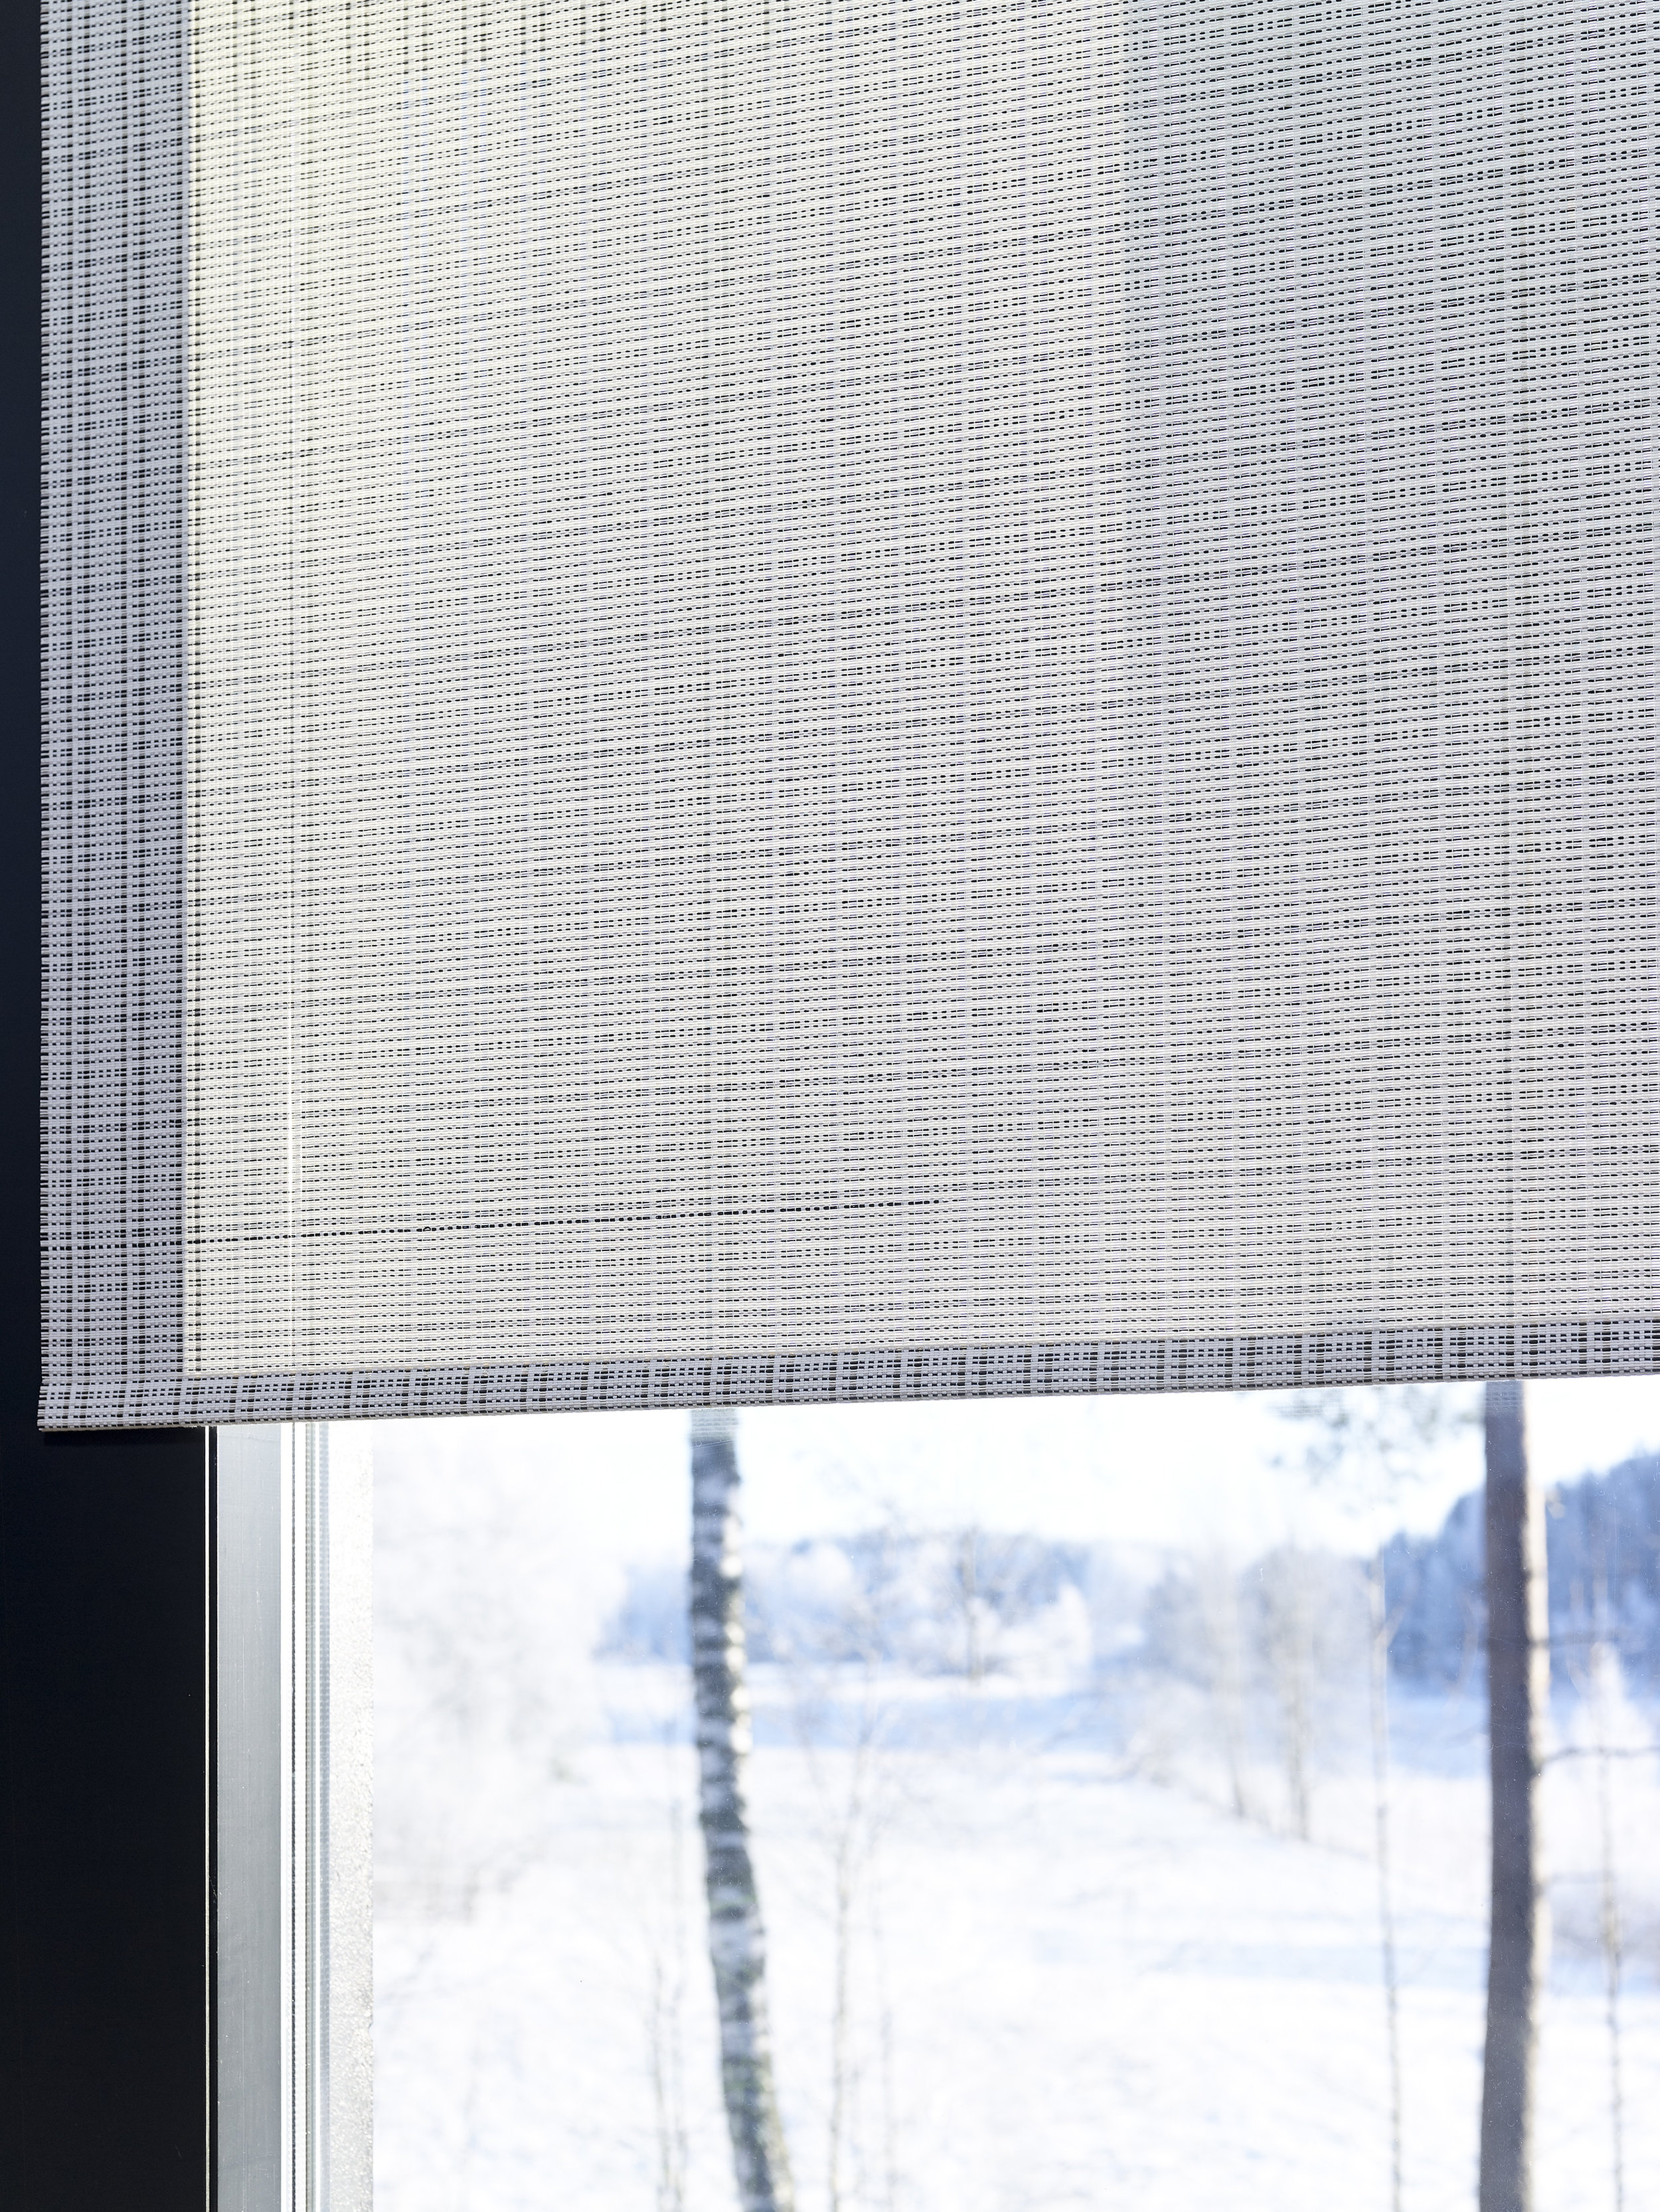 Roller blind wit chain / Cloud fabric 2140915 black-stone